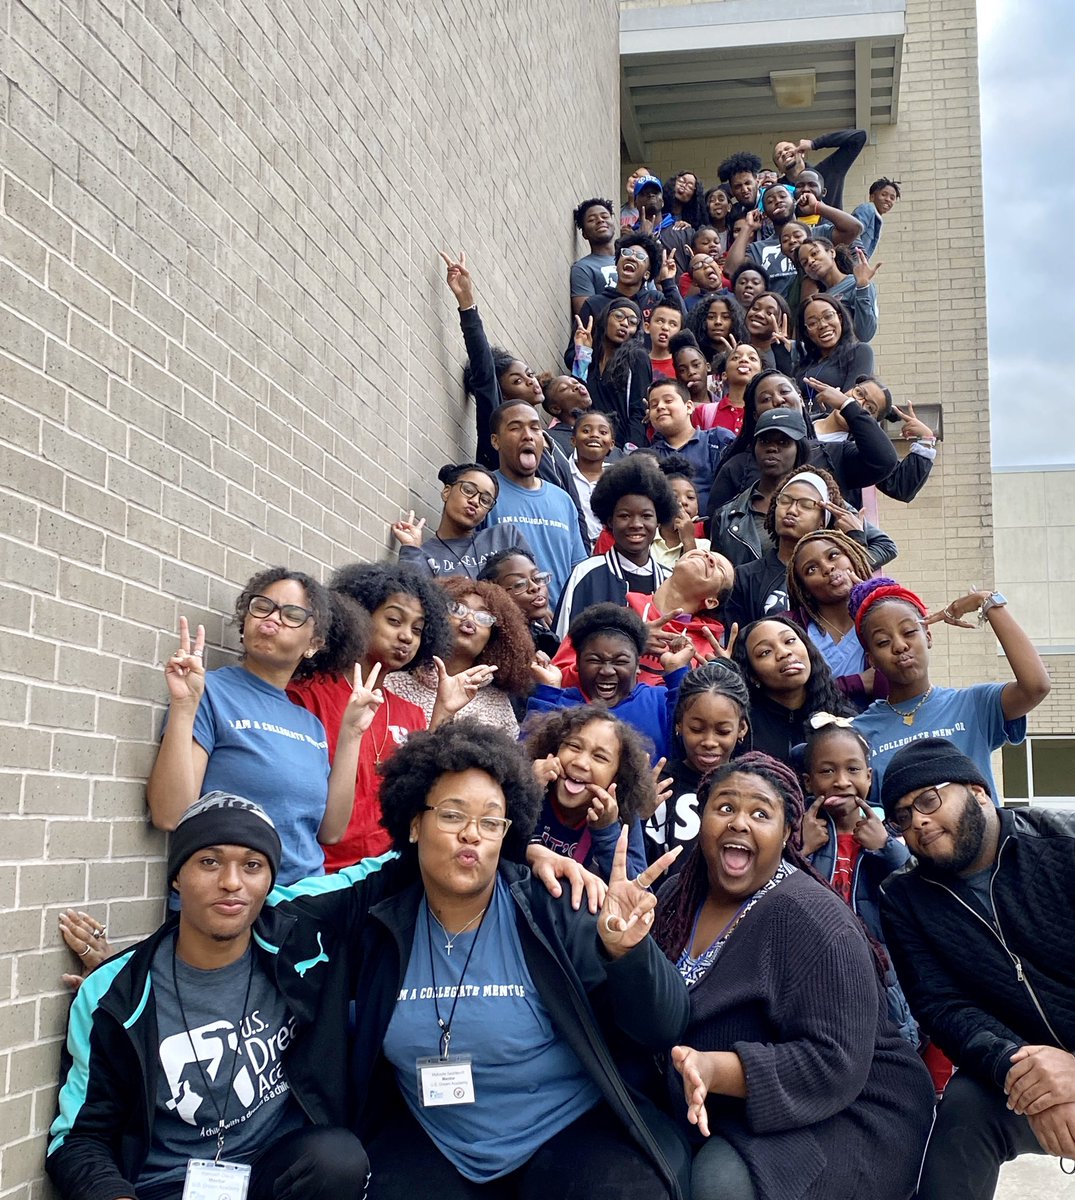 This is how we ended National Mentoring Month ⁦@USDreamAcademy⁩ Houston. The Village #MentorIRL #NationalMentoringMonth